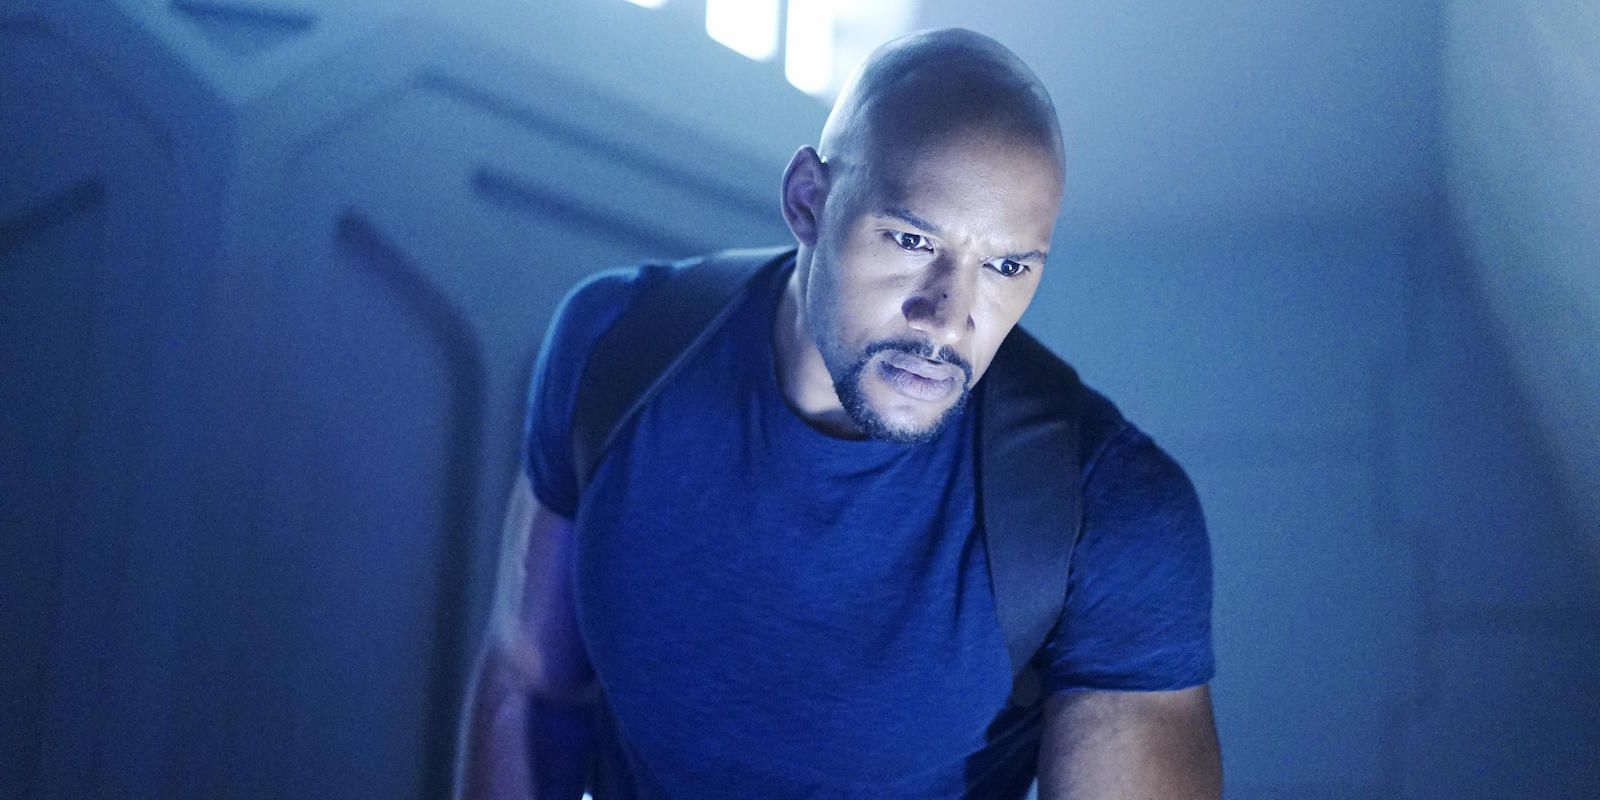 Agents of SHIELD Meet the New Boss Mack Henry Simmons